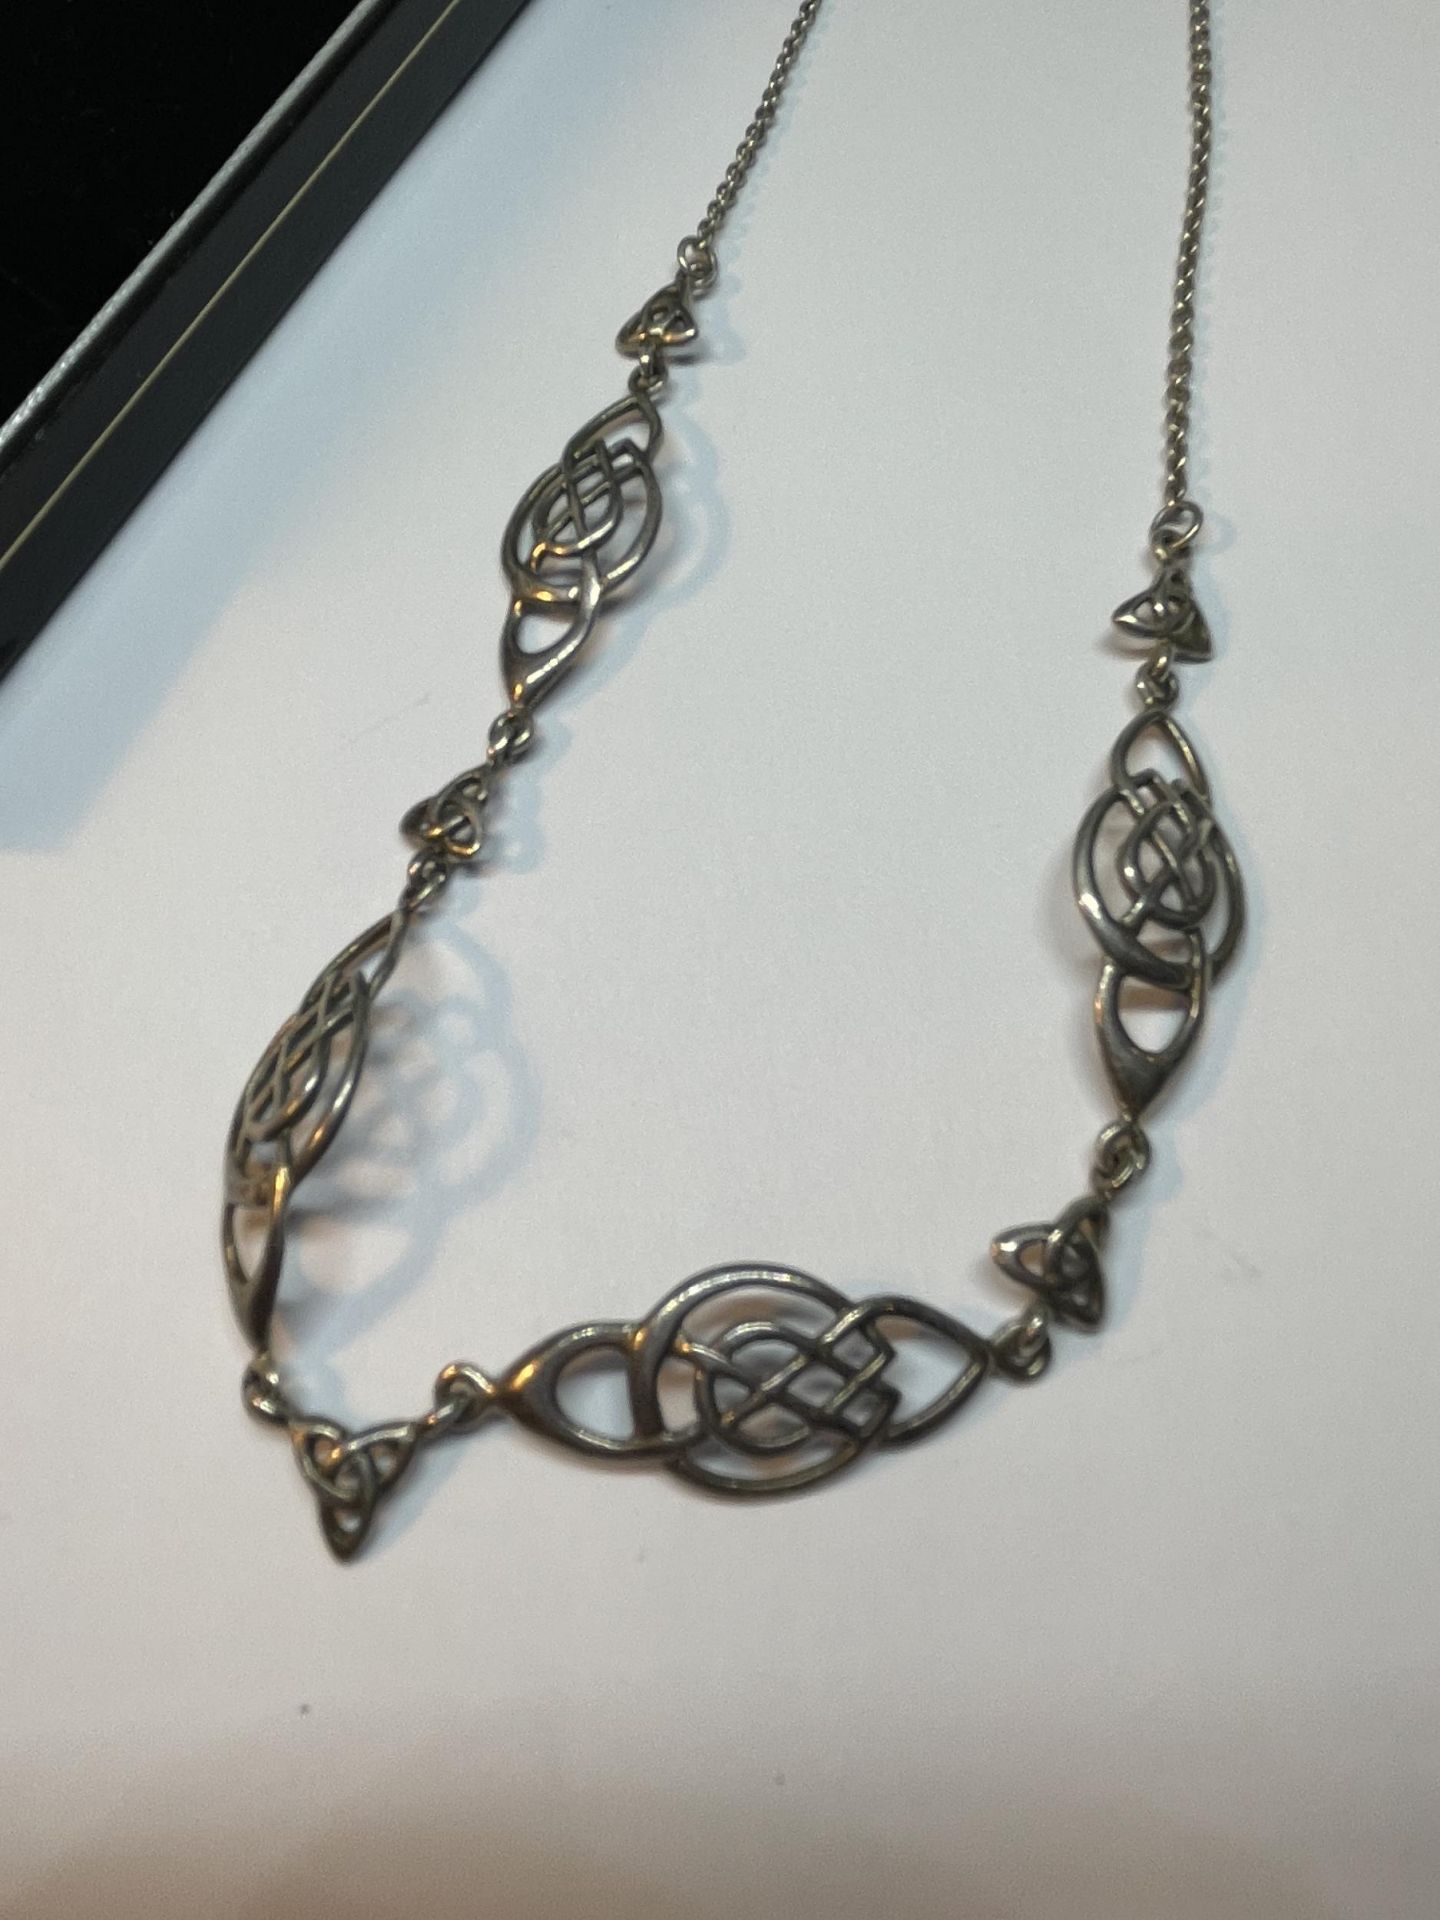 A MACKINTOSH NECKLACE IN A PRESENTATION BOX - Image 2 of 3